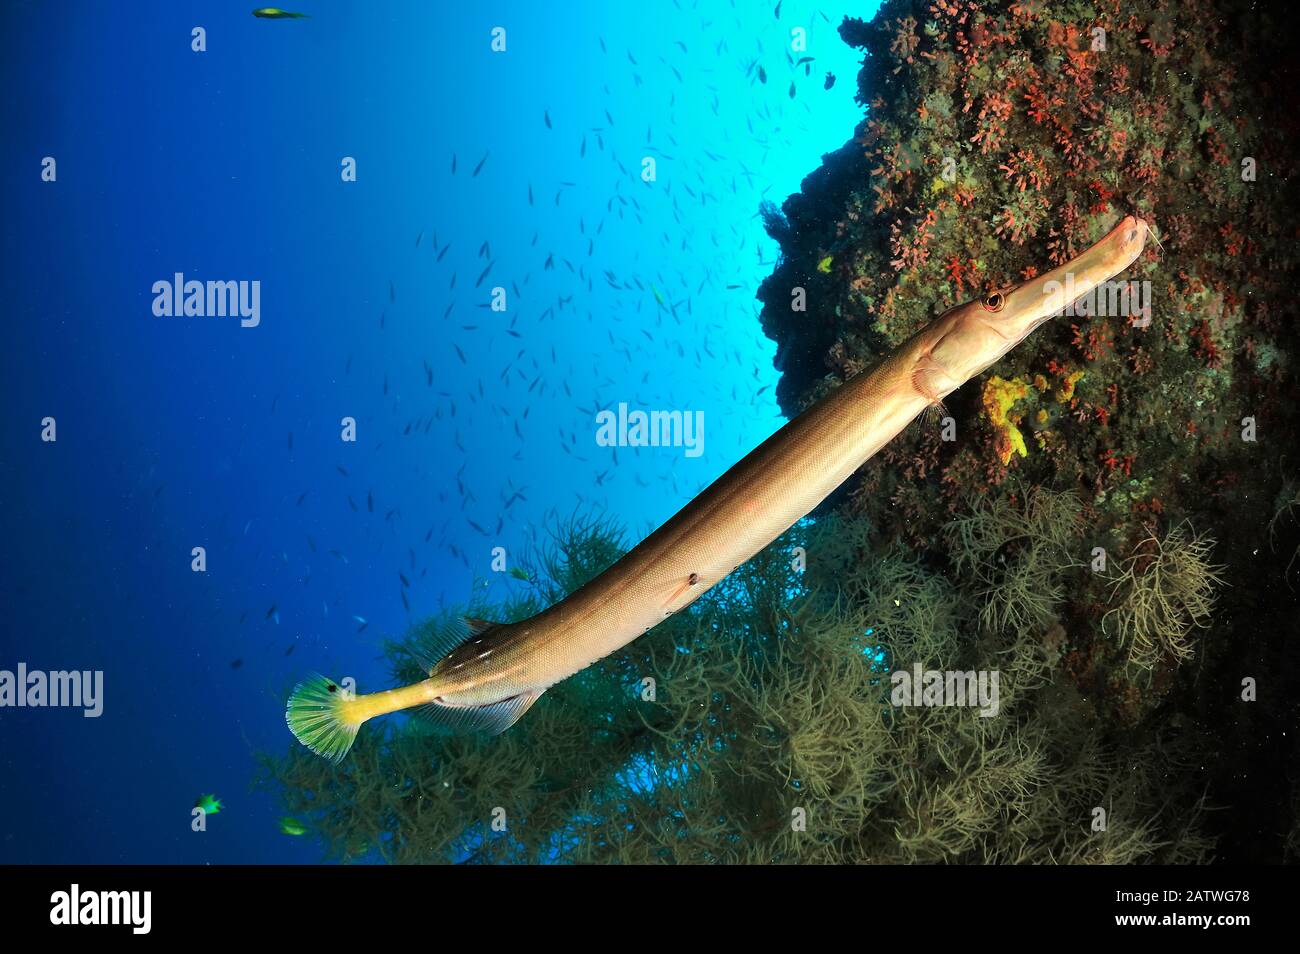 Trumpetfish (Aulostomus chinensis) on the coral drop off, Sulu Sea, Philippines. Stock Photo